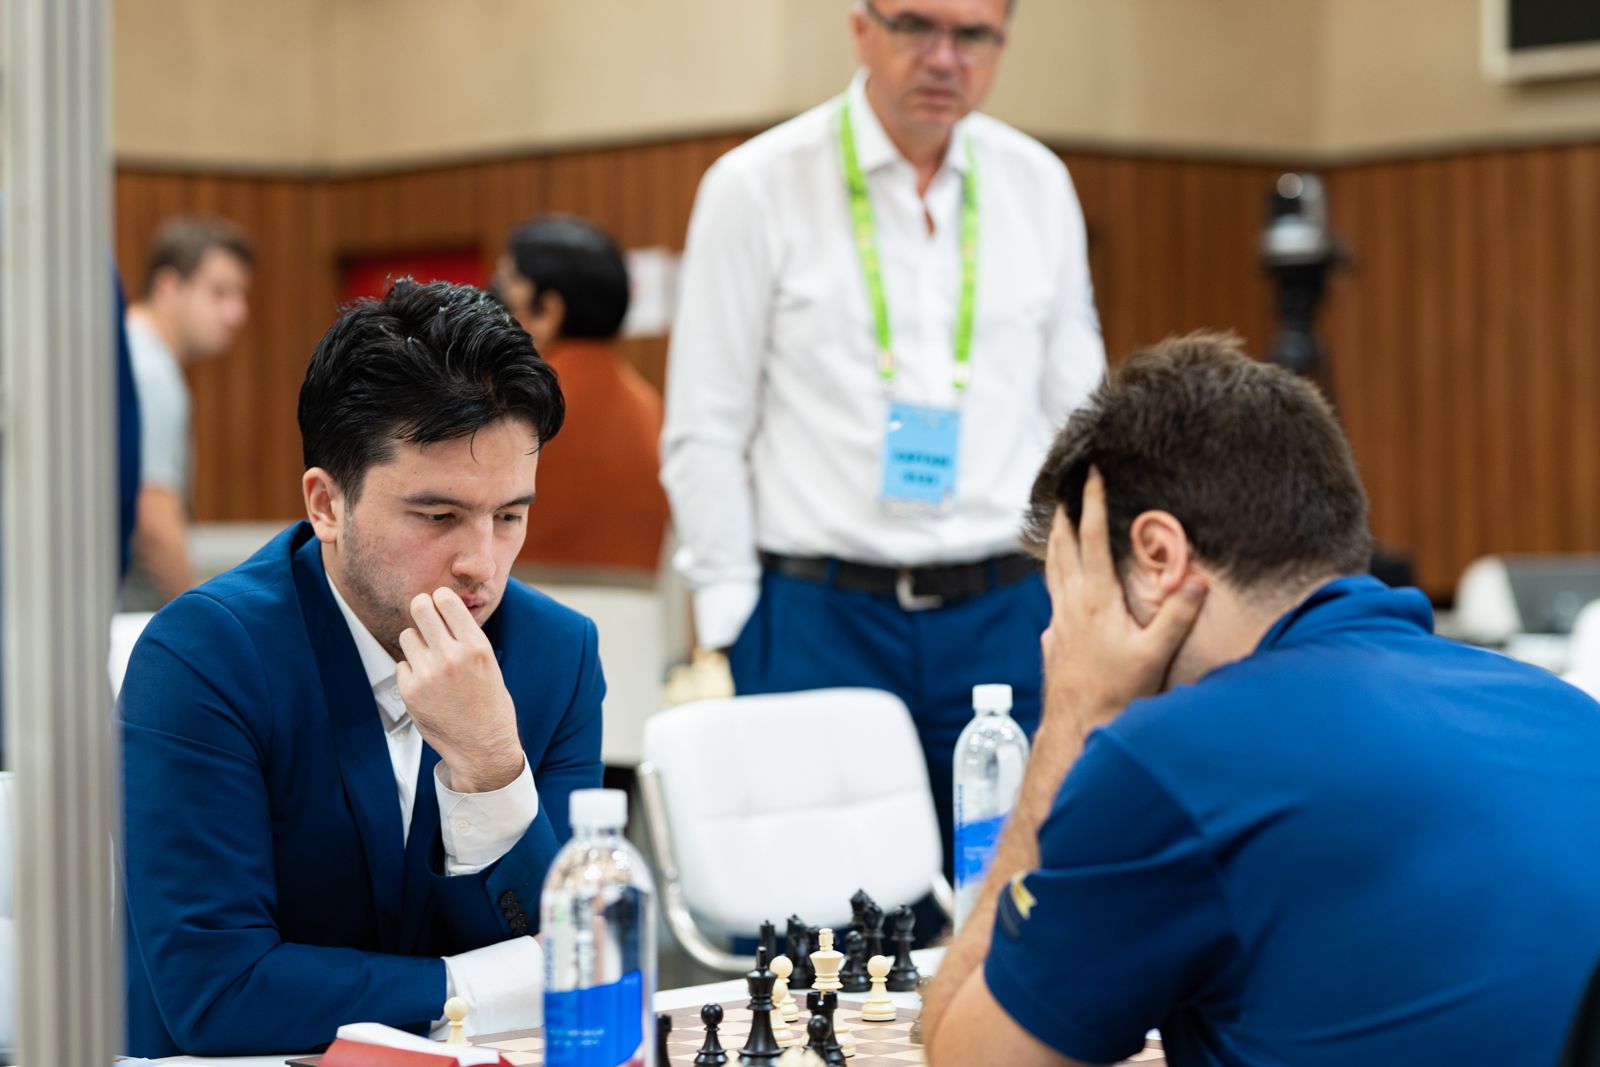 Bahamas Chess Olympiad Team scores record number of points at 44th